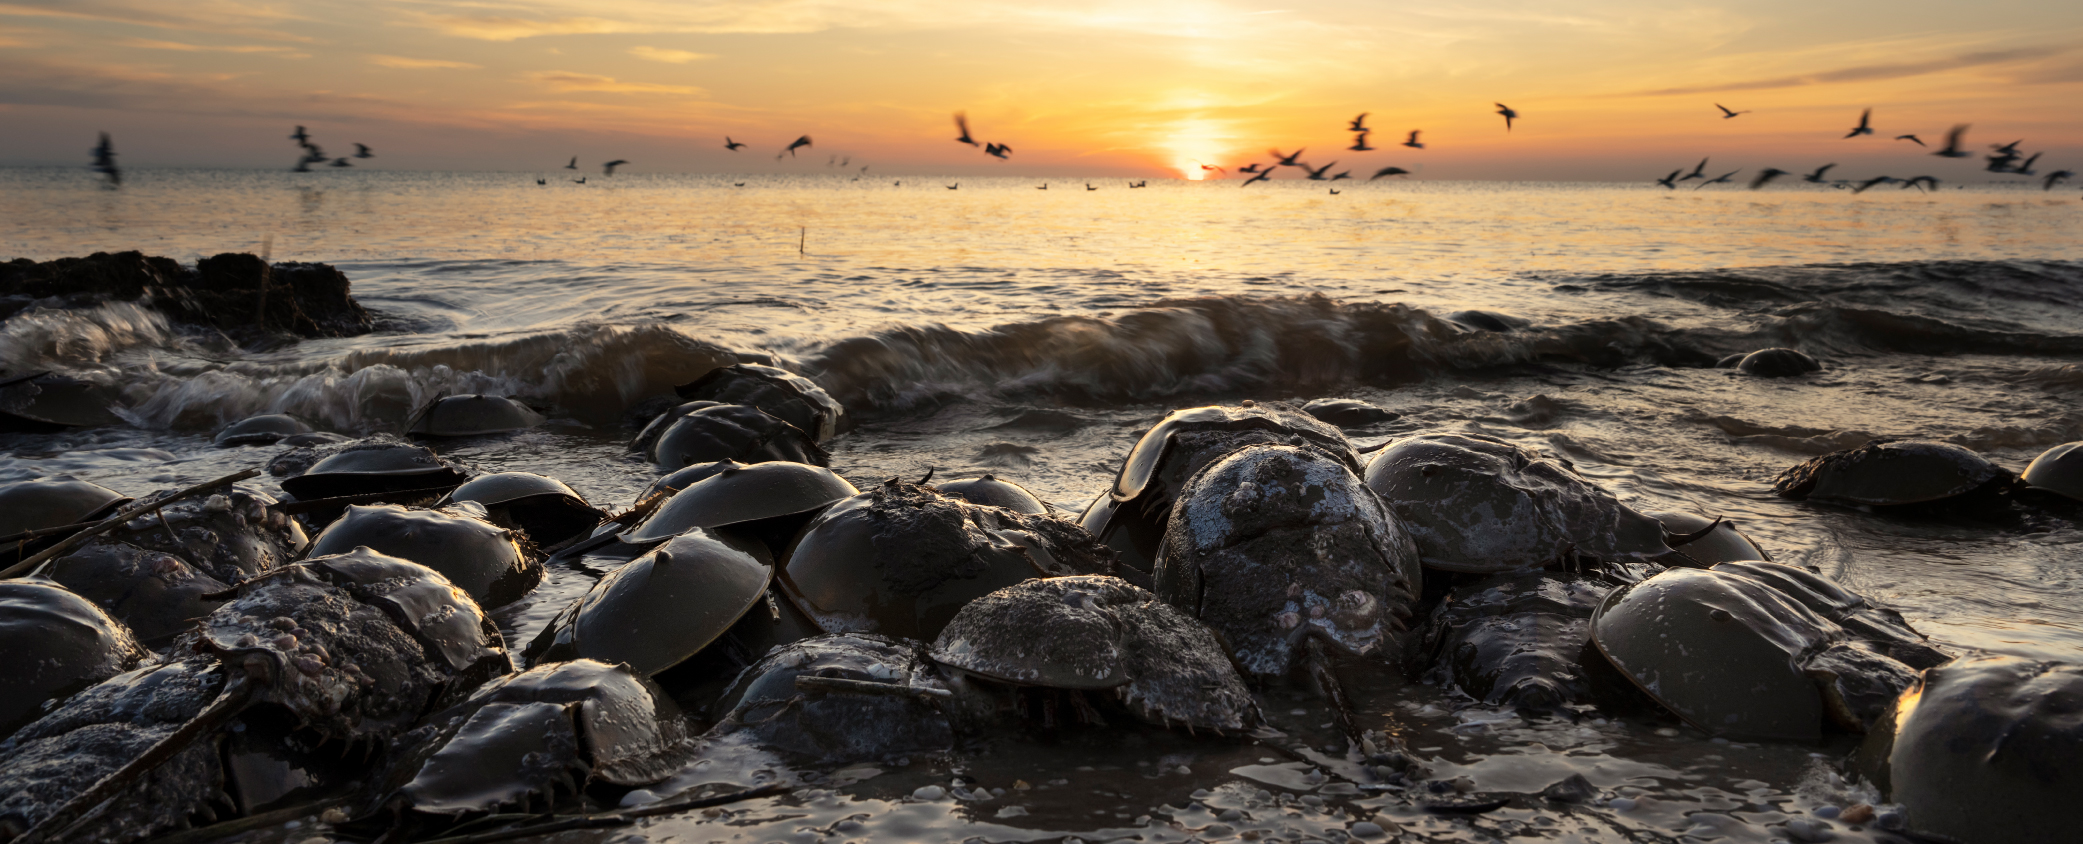 Horseshoe crabs at the water's edge with birds flying at sunrise